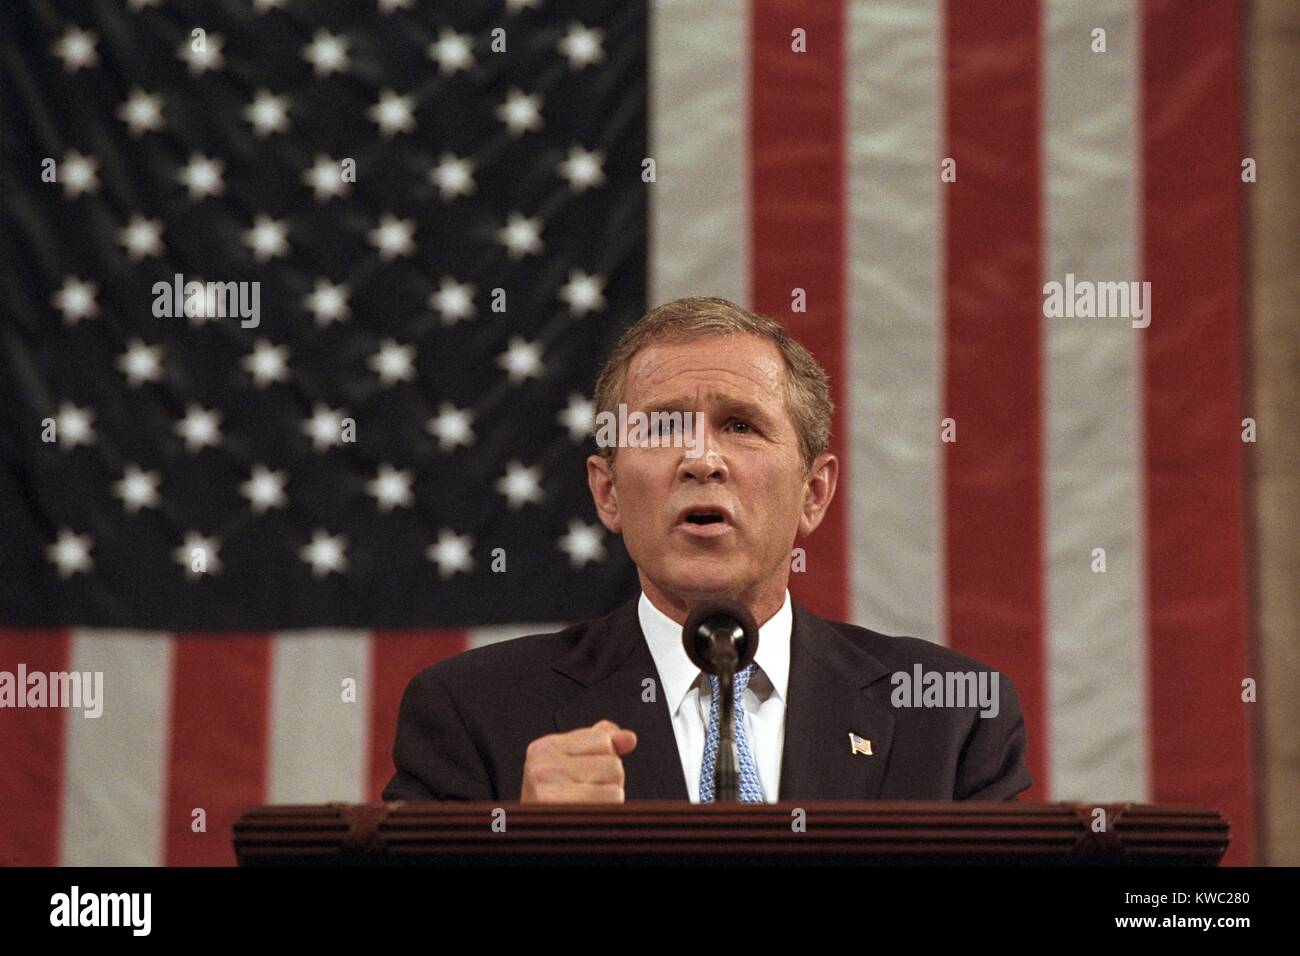 President George W. Bush announced that 'Our war on terror begins with Al Qaeda, but it does not end there. It will not end until every terrorist group of global reach has been found, stopped and defeated.' On Sept. 20, 2001, to a Joint Session of Congress, 9 days after the 9-11 Terrorist Attacks. (BSLOC 2015 2 166) Stock Photo